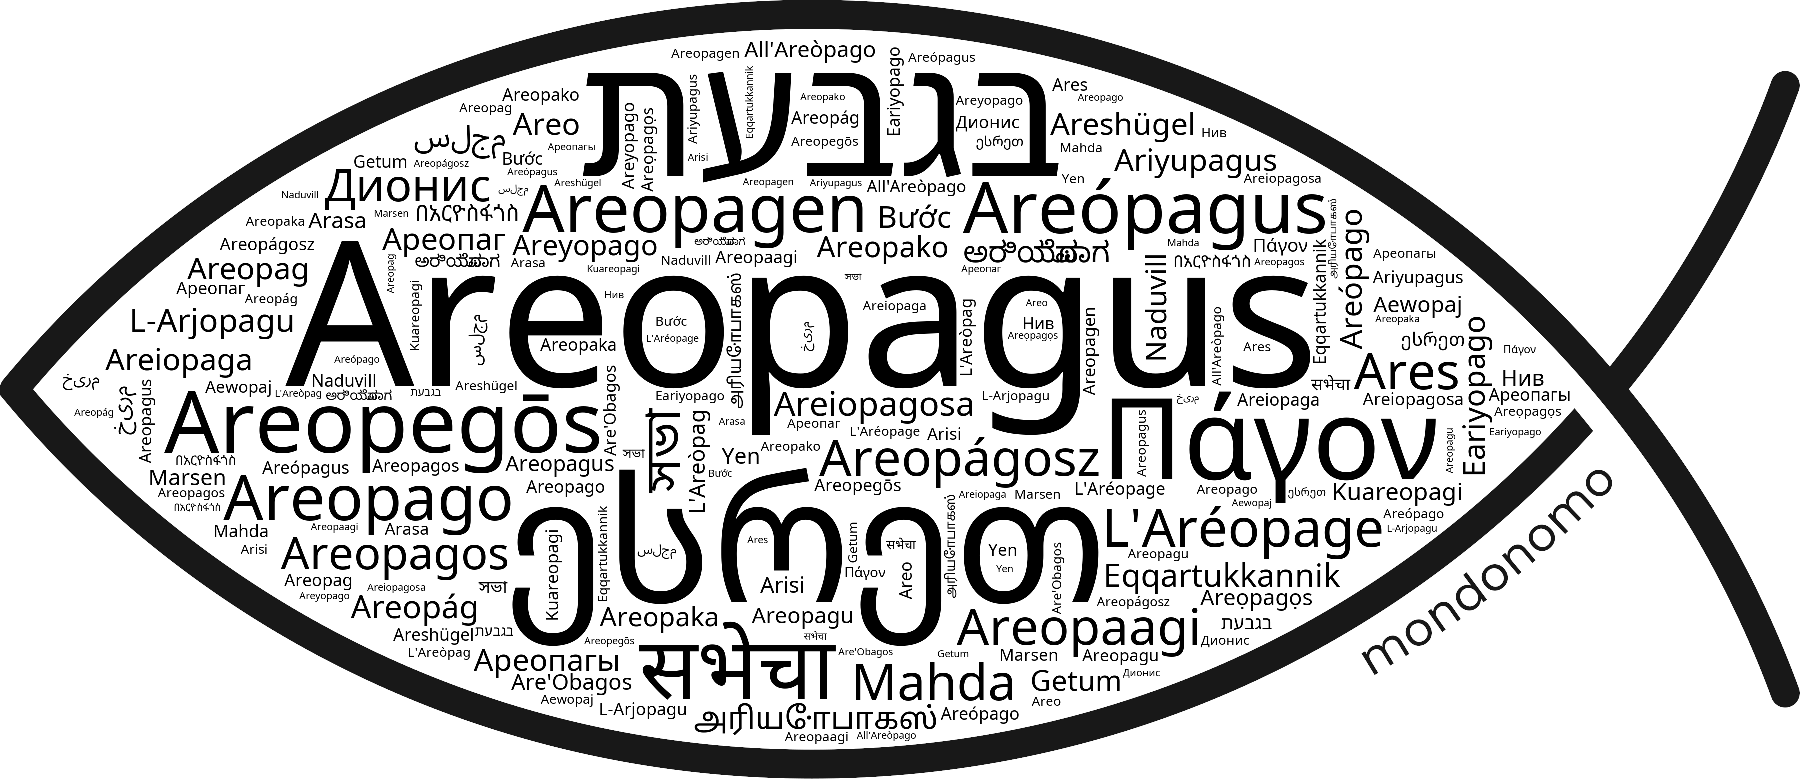 Name Areopagus in the world's Bibles